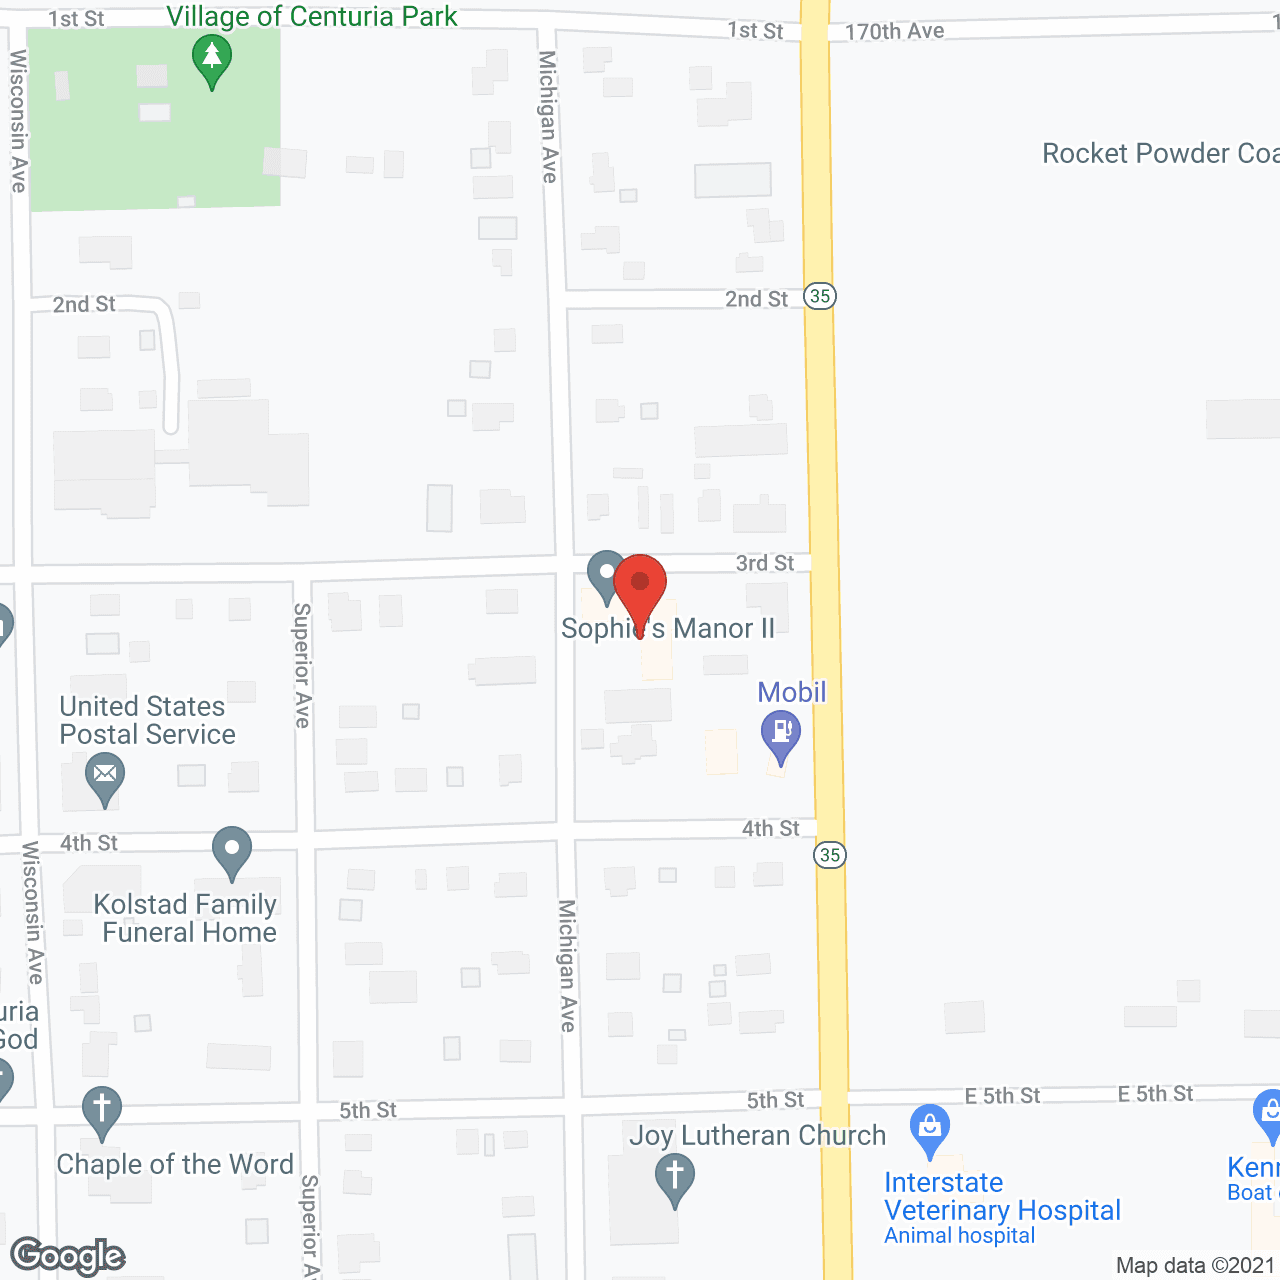 Sophie's Manor Assisted Living II in google map